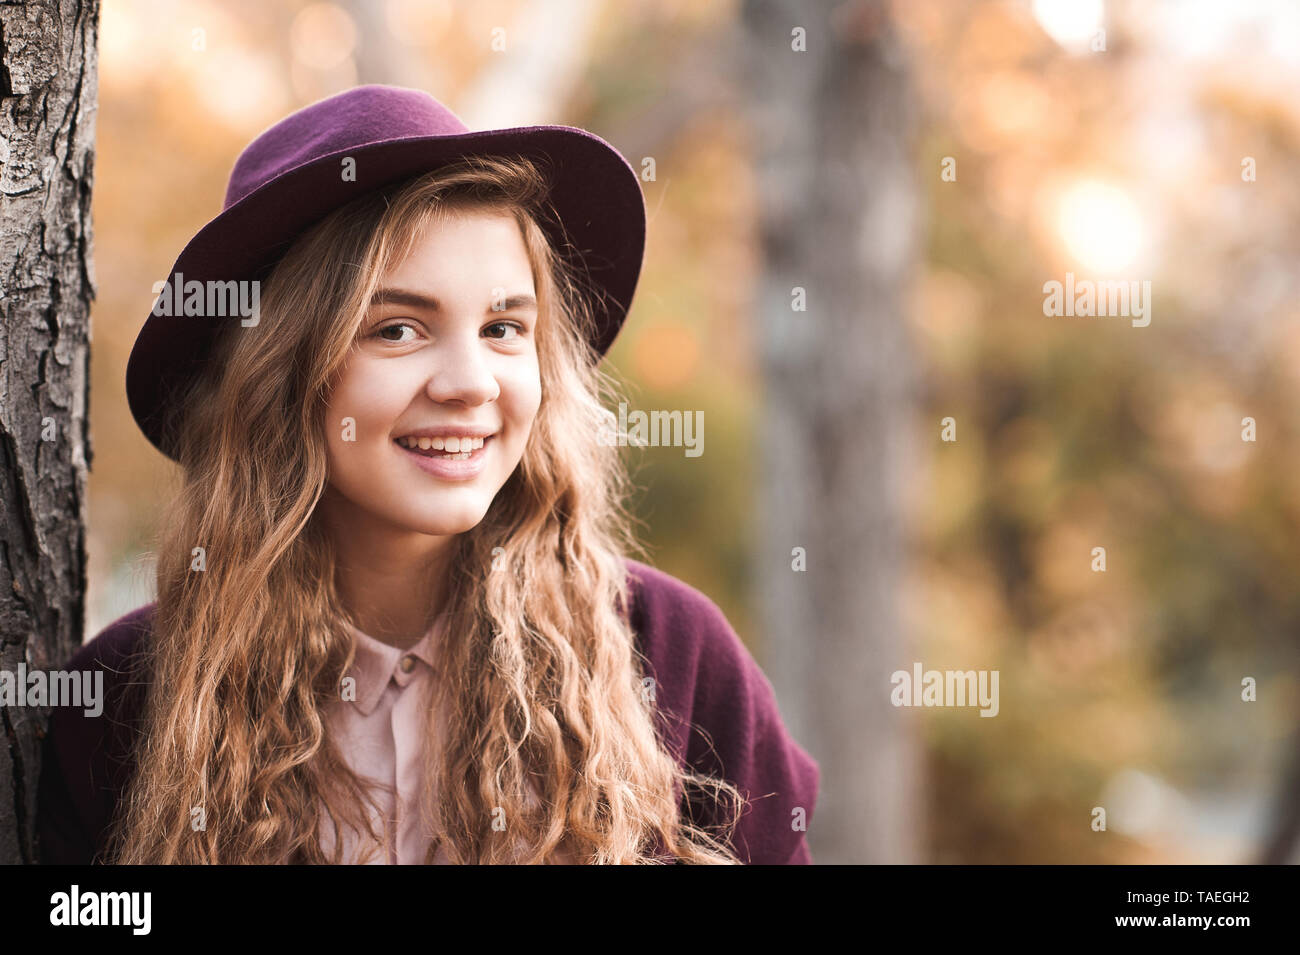 Smiling Teenage Girl 14 16 Year Old Wearing Stylish Felt Hat Posing In Park Looking At Camera 